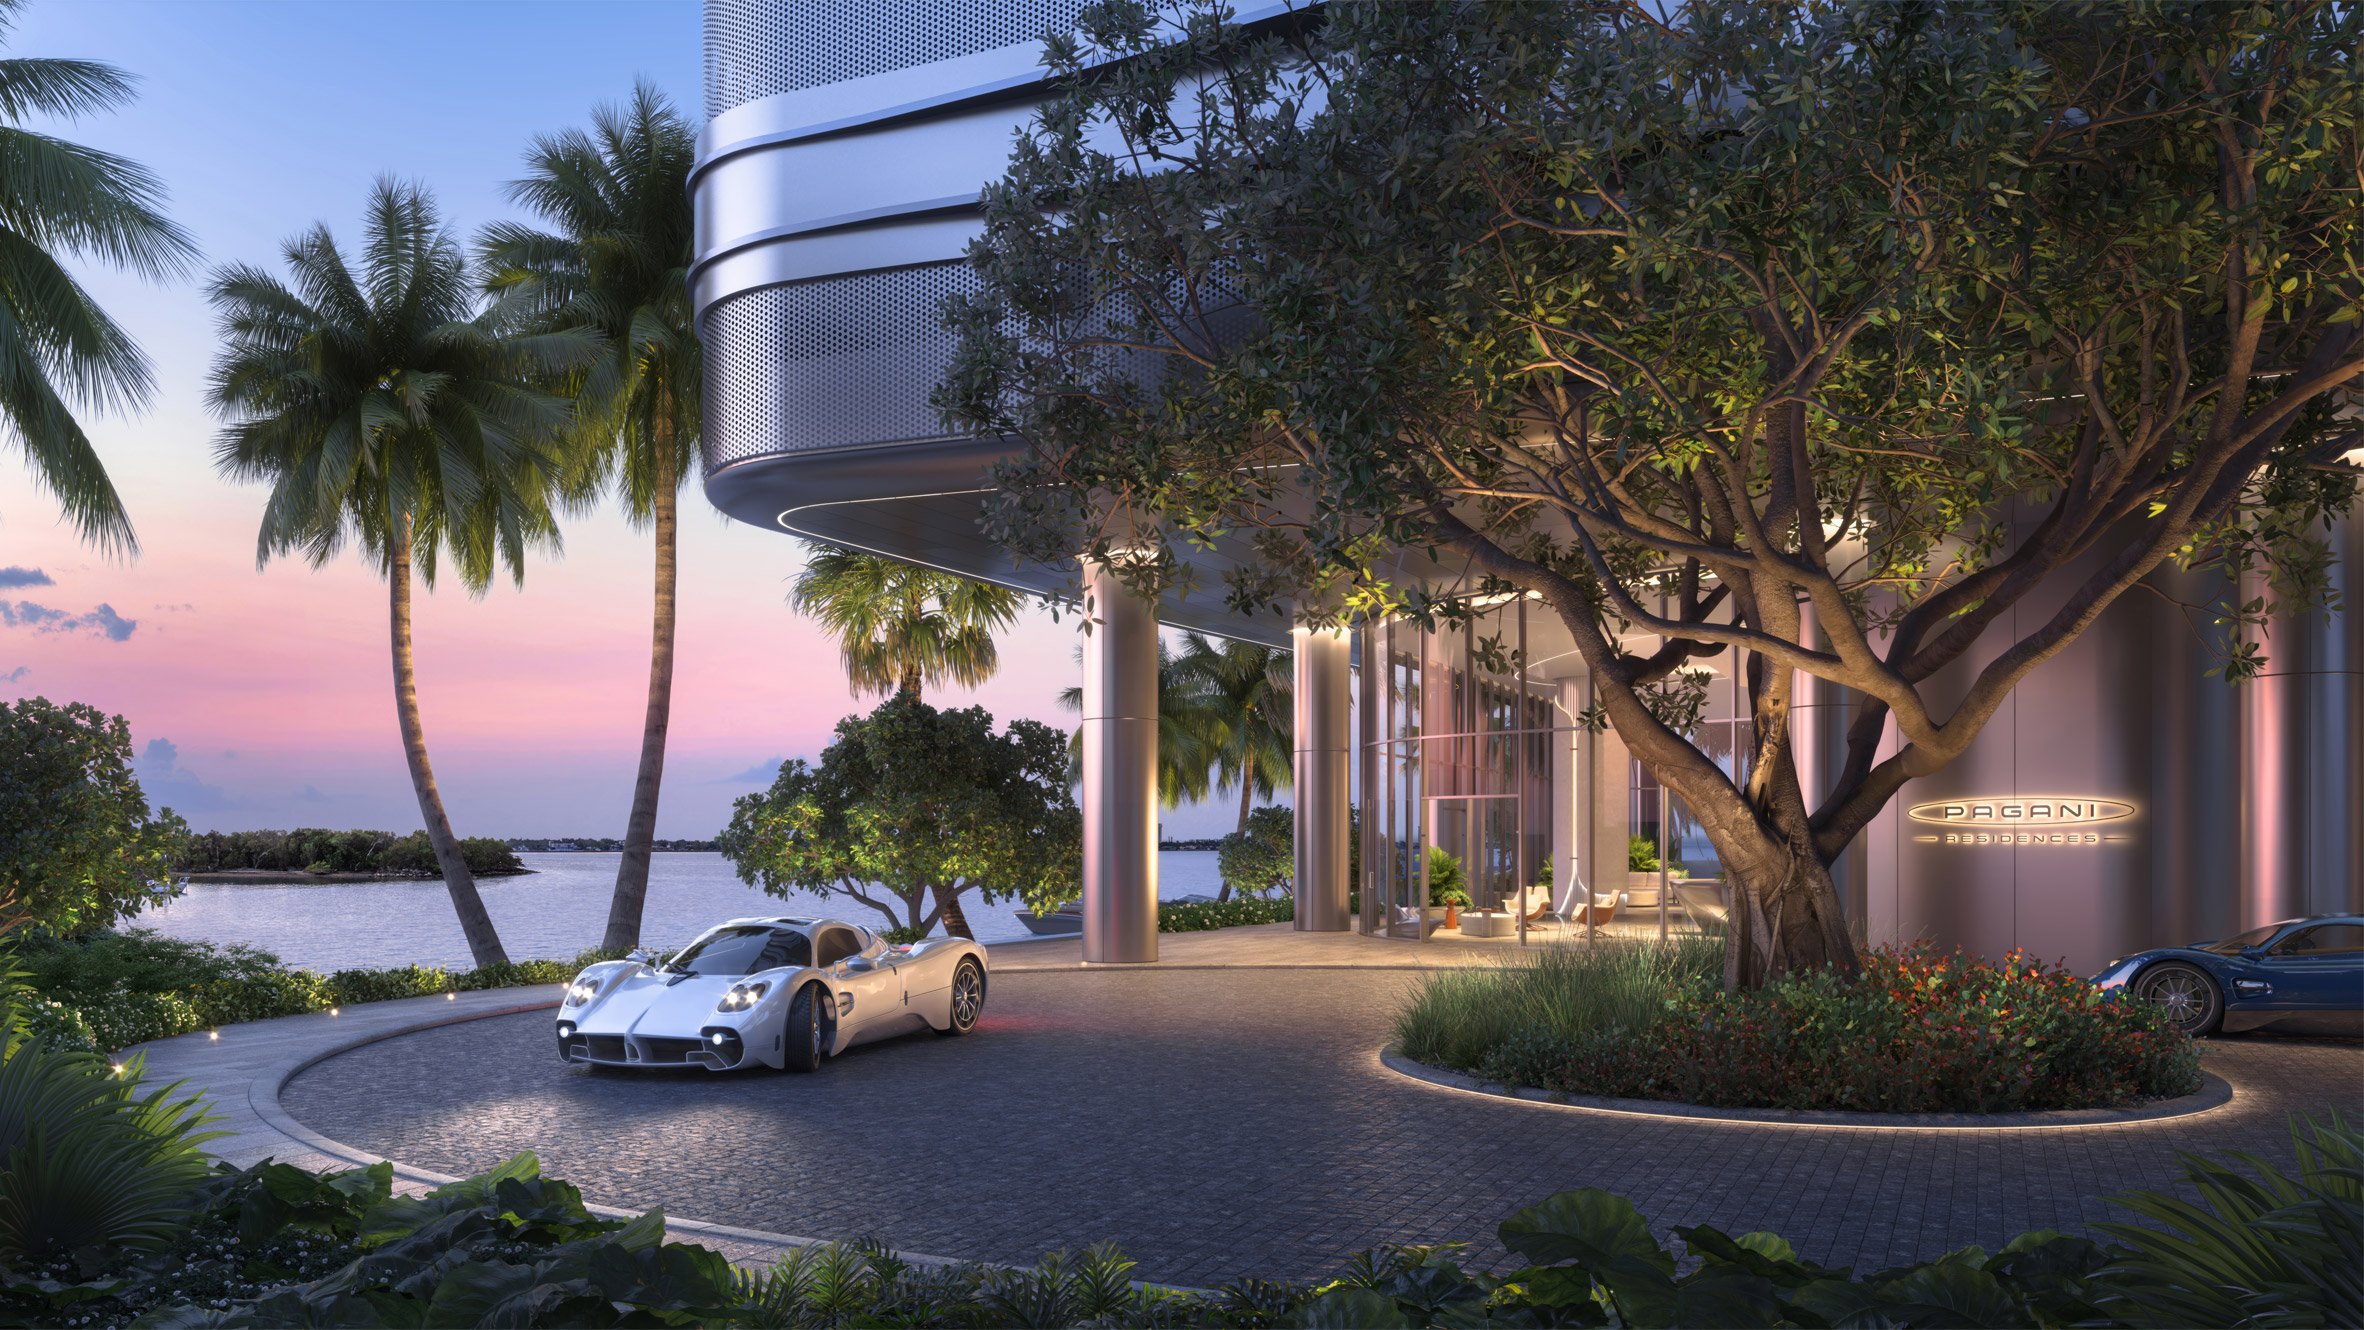 Rendering of the entrance to Pagani Residences